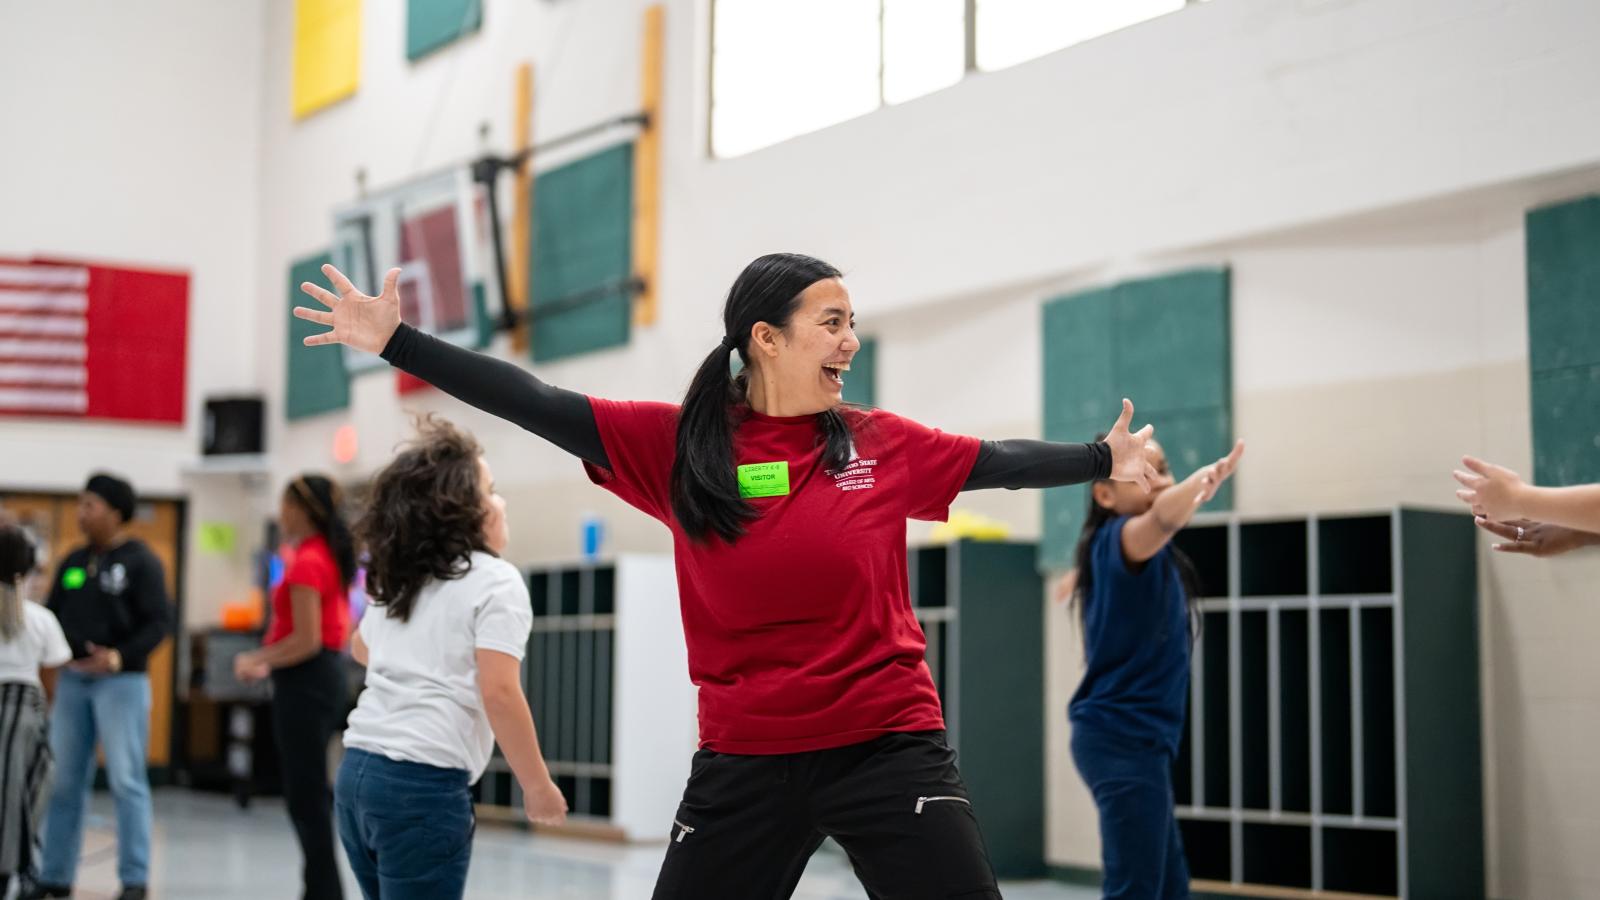 Dancer teaching students in a gym